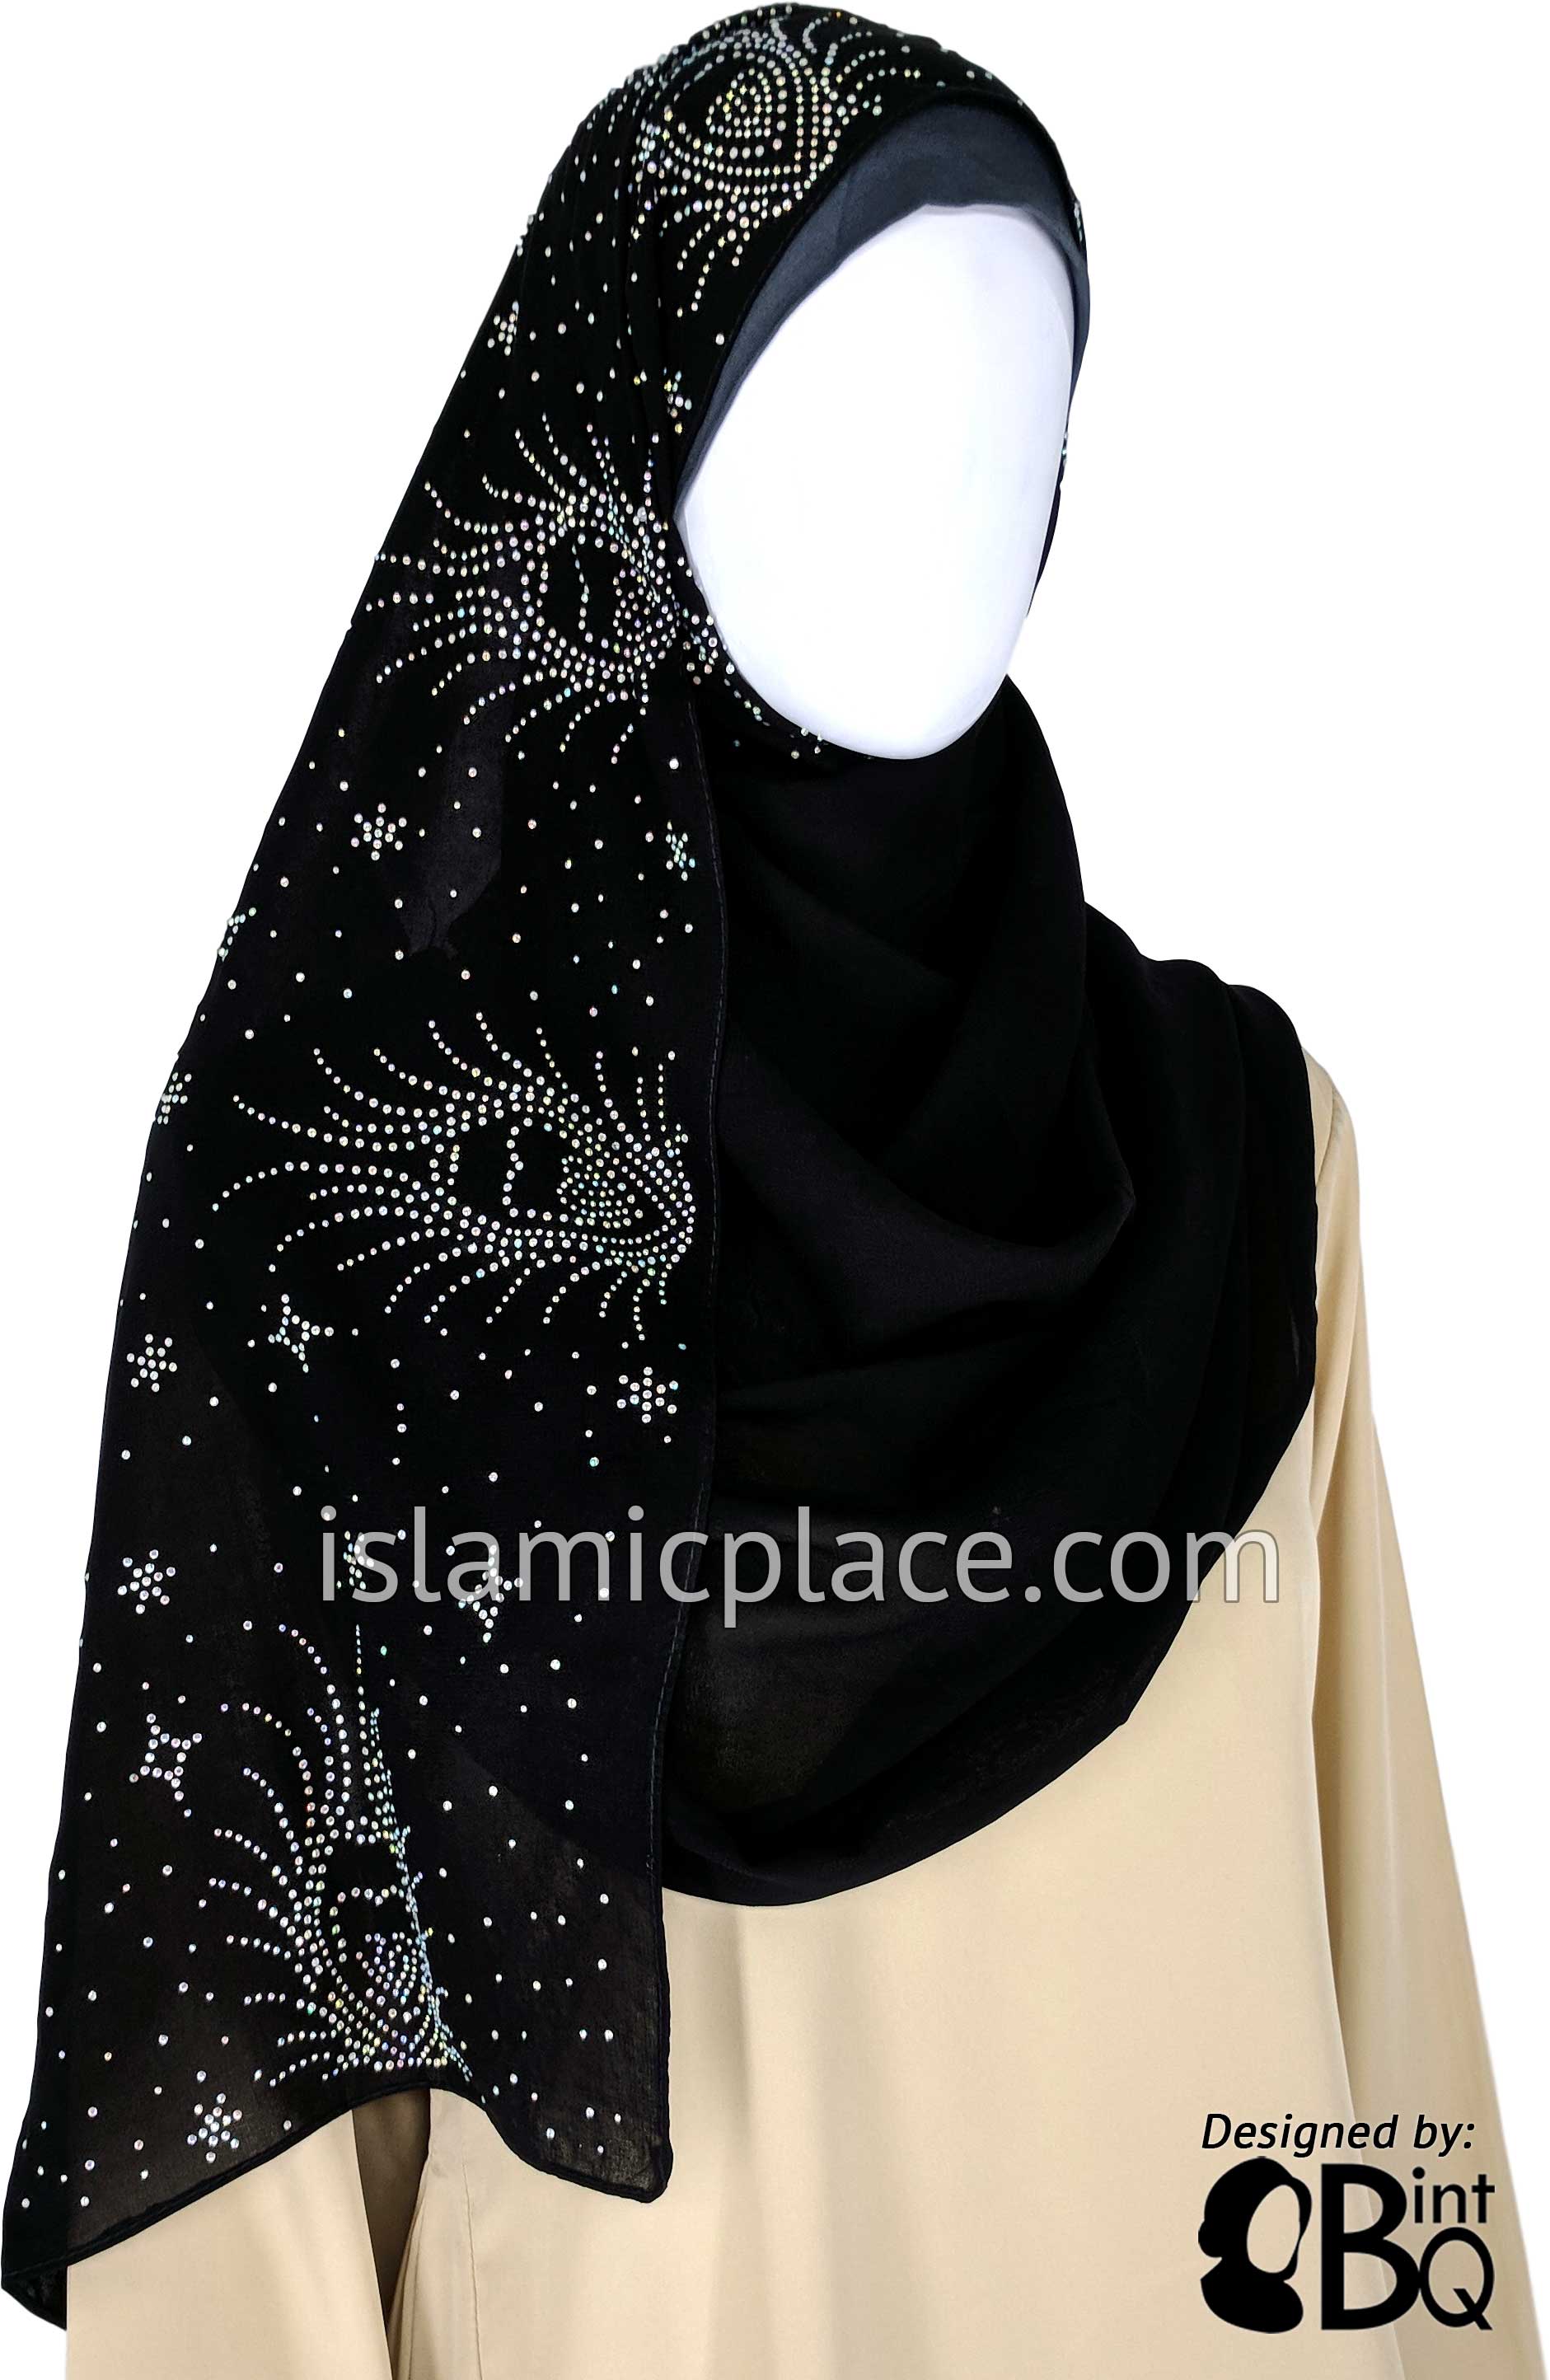 Silver Embedded Hearts Long Rectangle Shayla Hijab with Stones 32"x72"